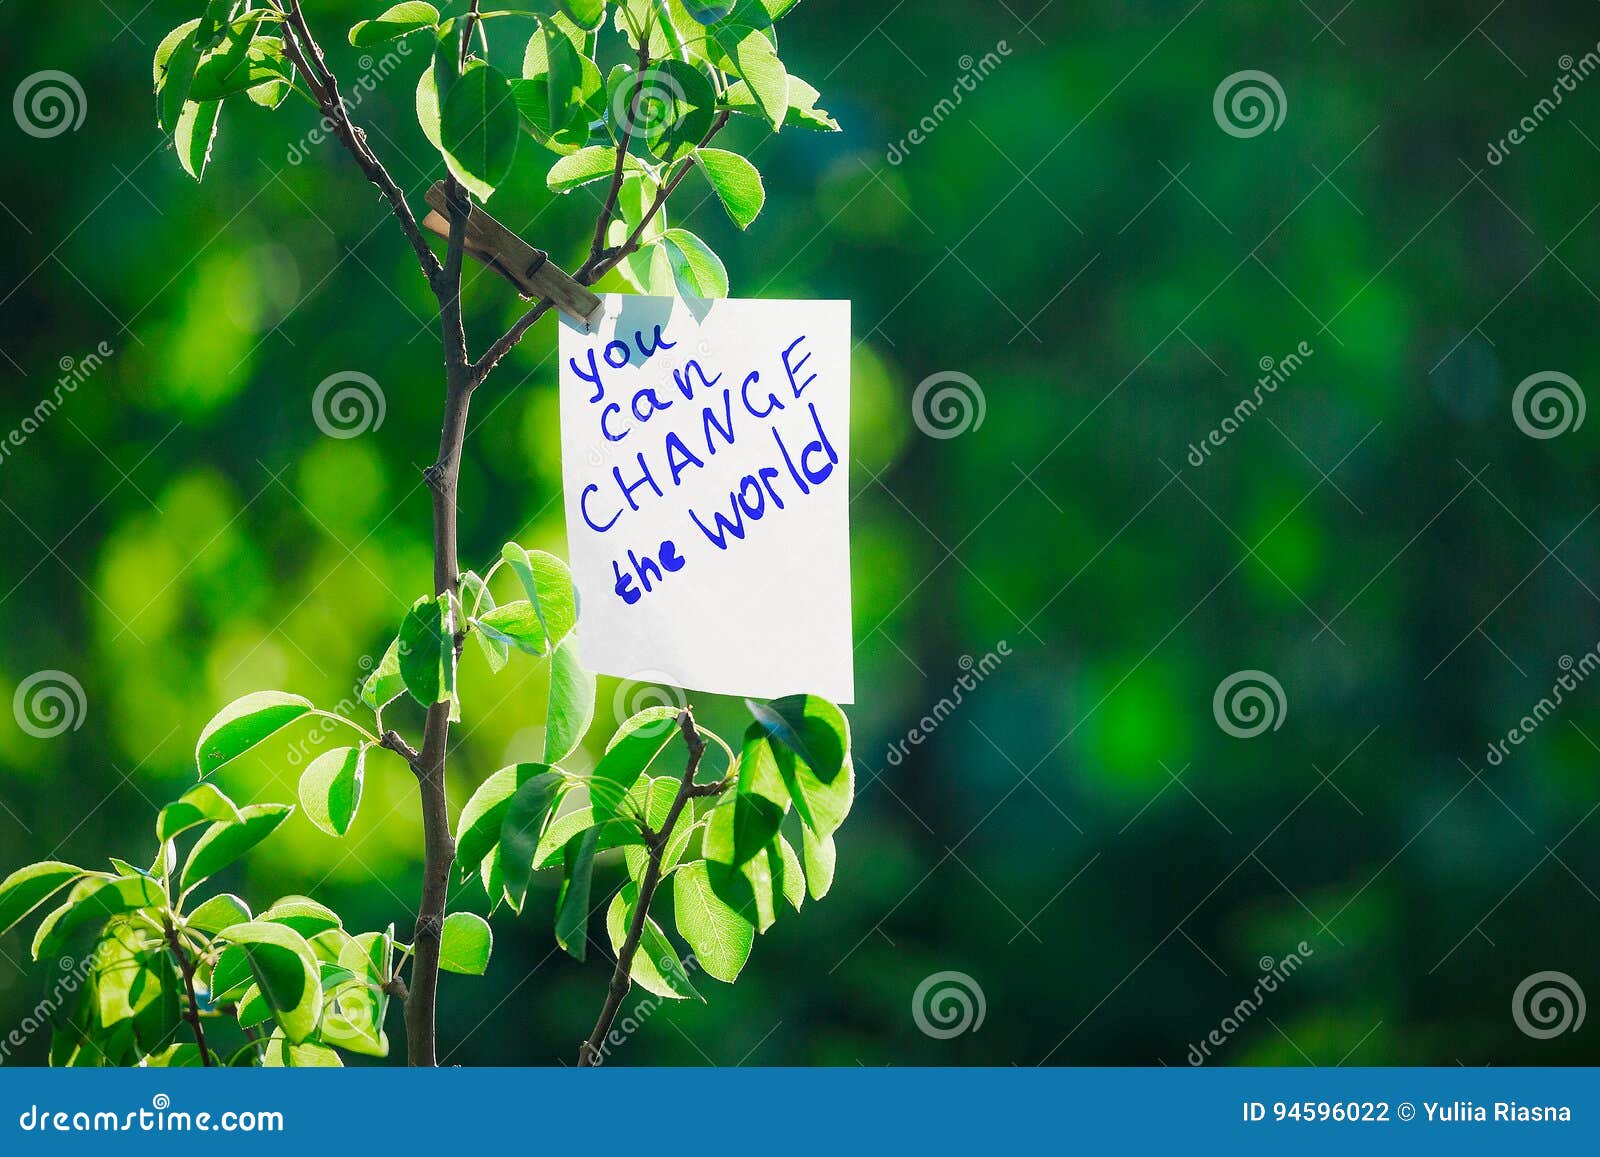 motivating phrase you can change the world. on a green background on a branch is a white paper with a motivating phrase